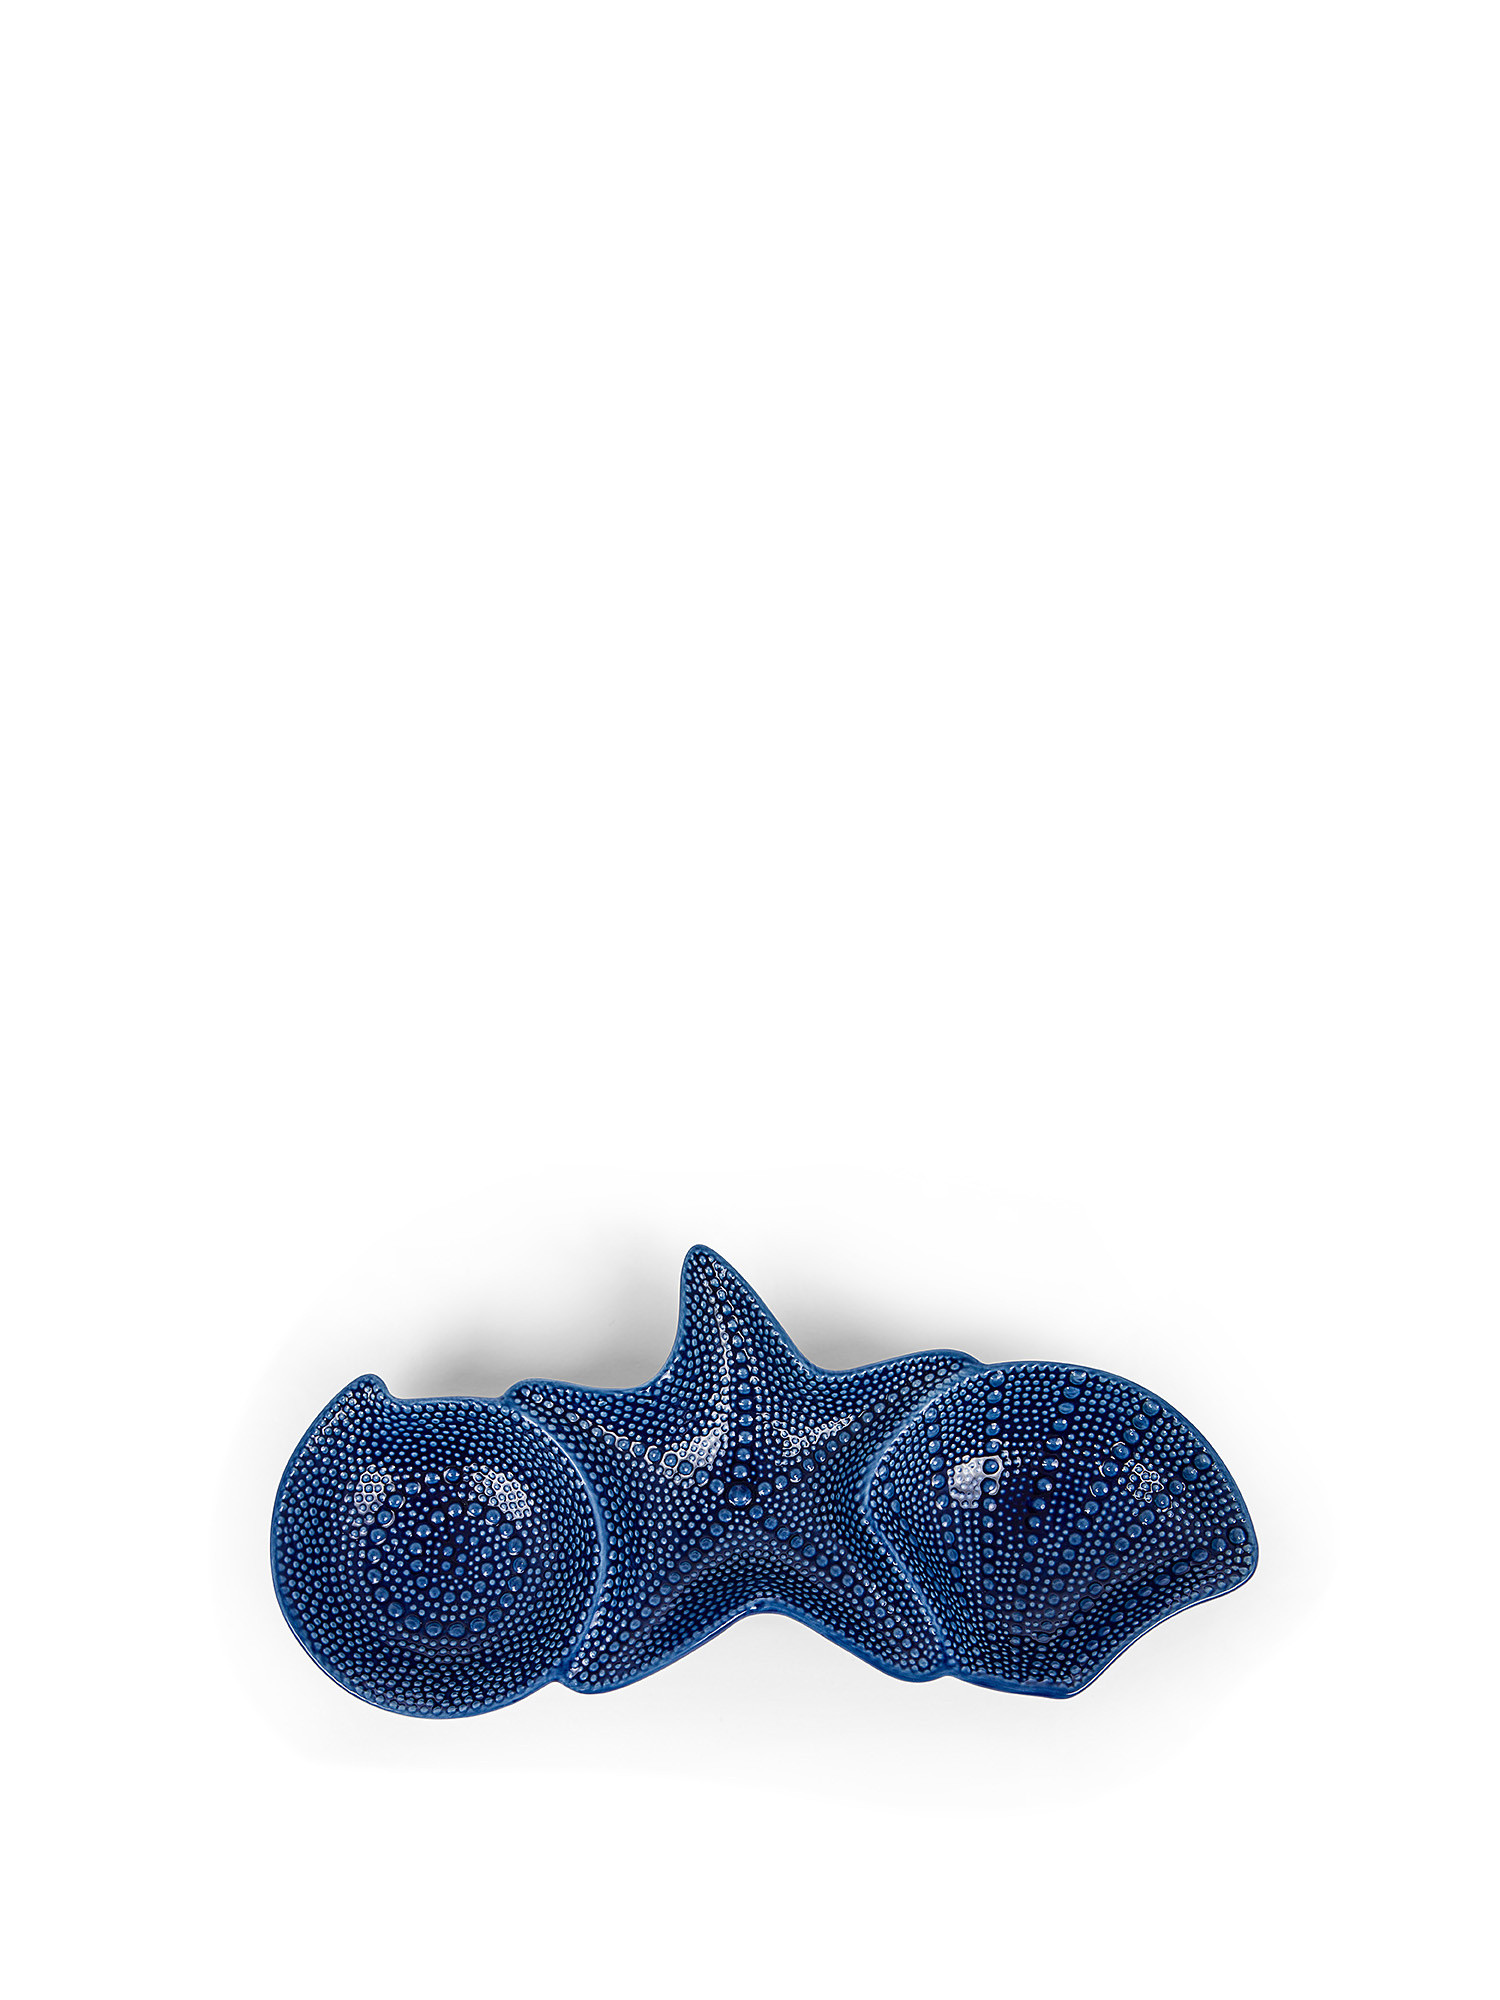 3-place clamshell hors d'oeuvre dish, Blue, large image number 0